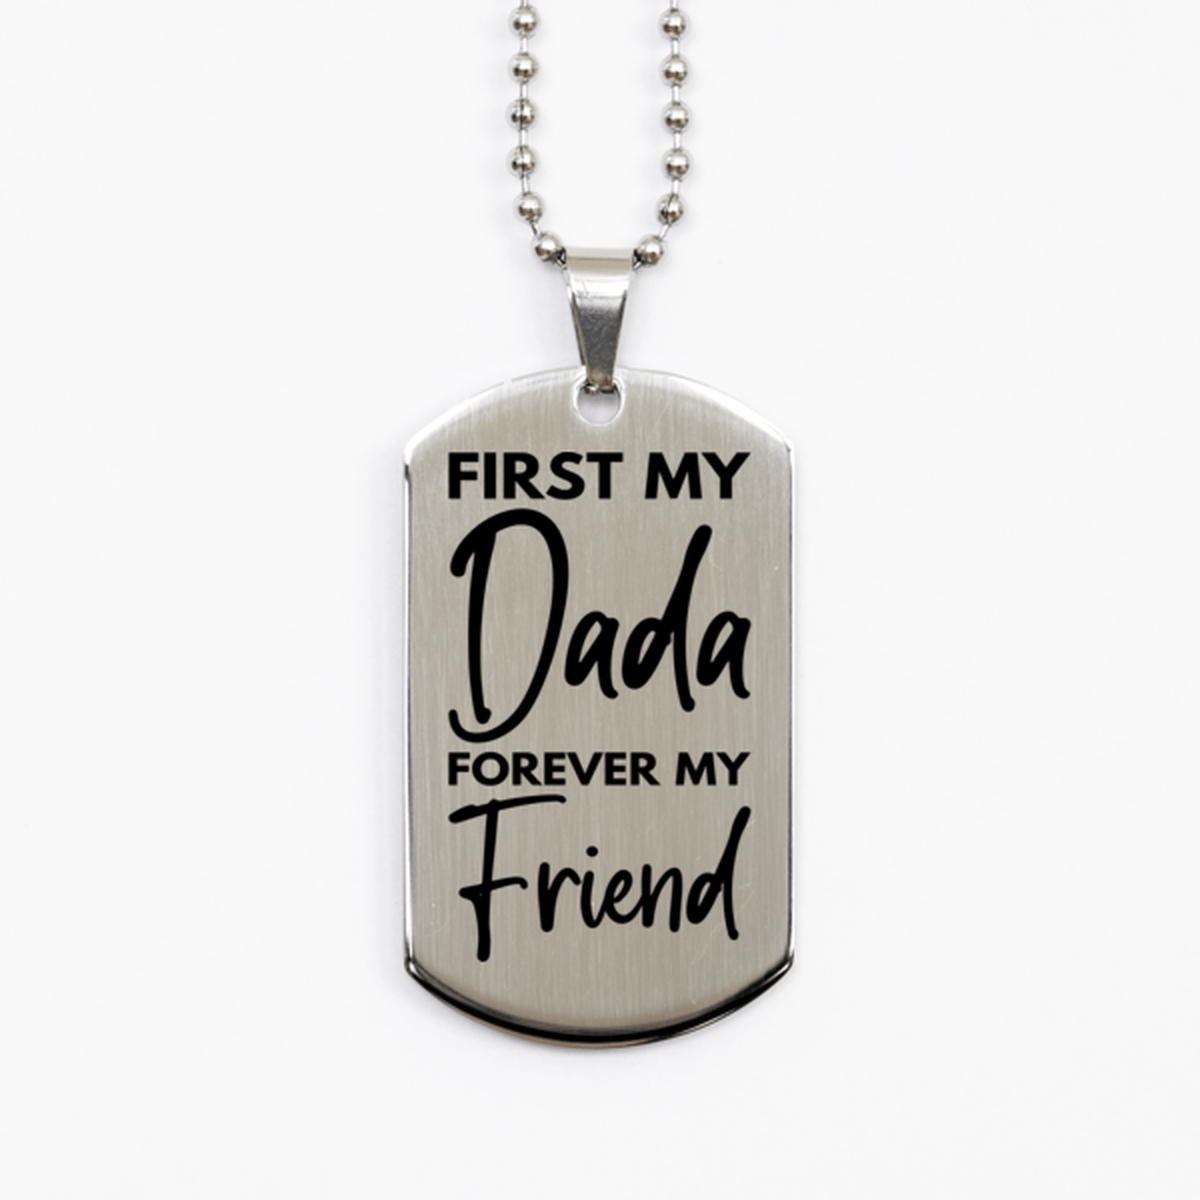 Inspirational Dada Silver Dog Tag Necklace, First My Dada Forever My Friend, Best Birthday Gifts for Dada